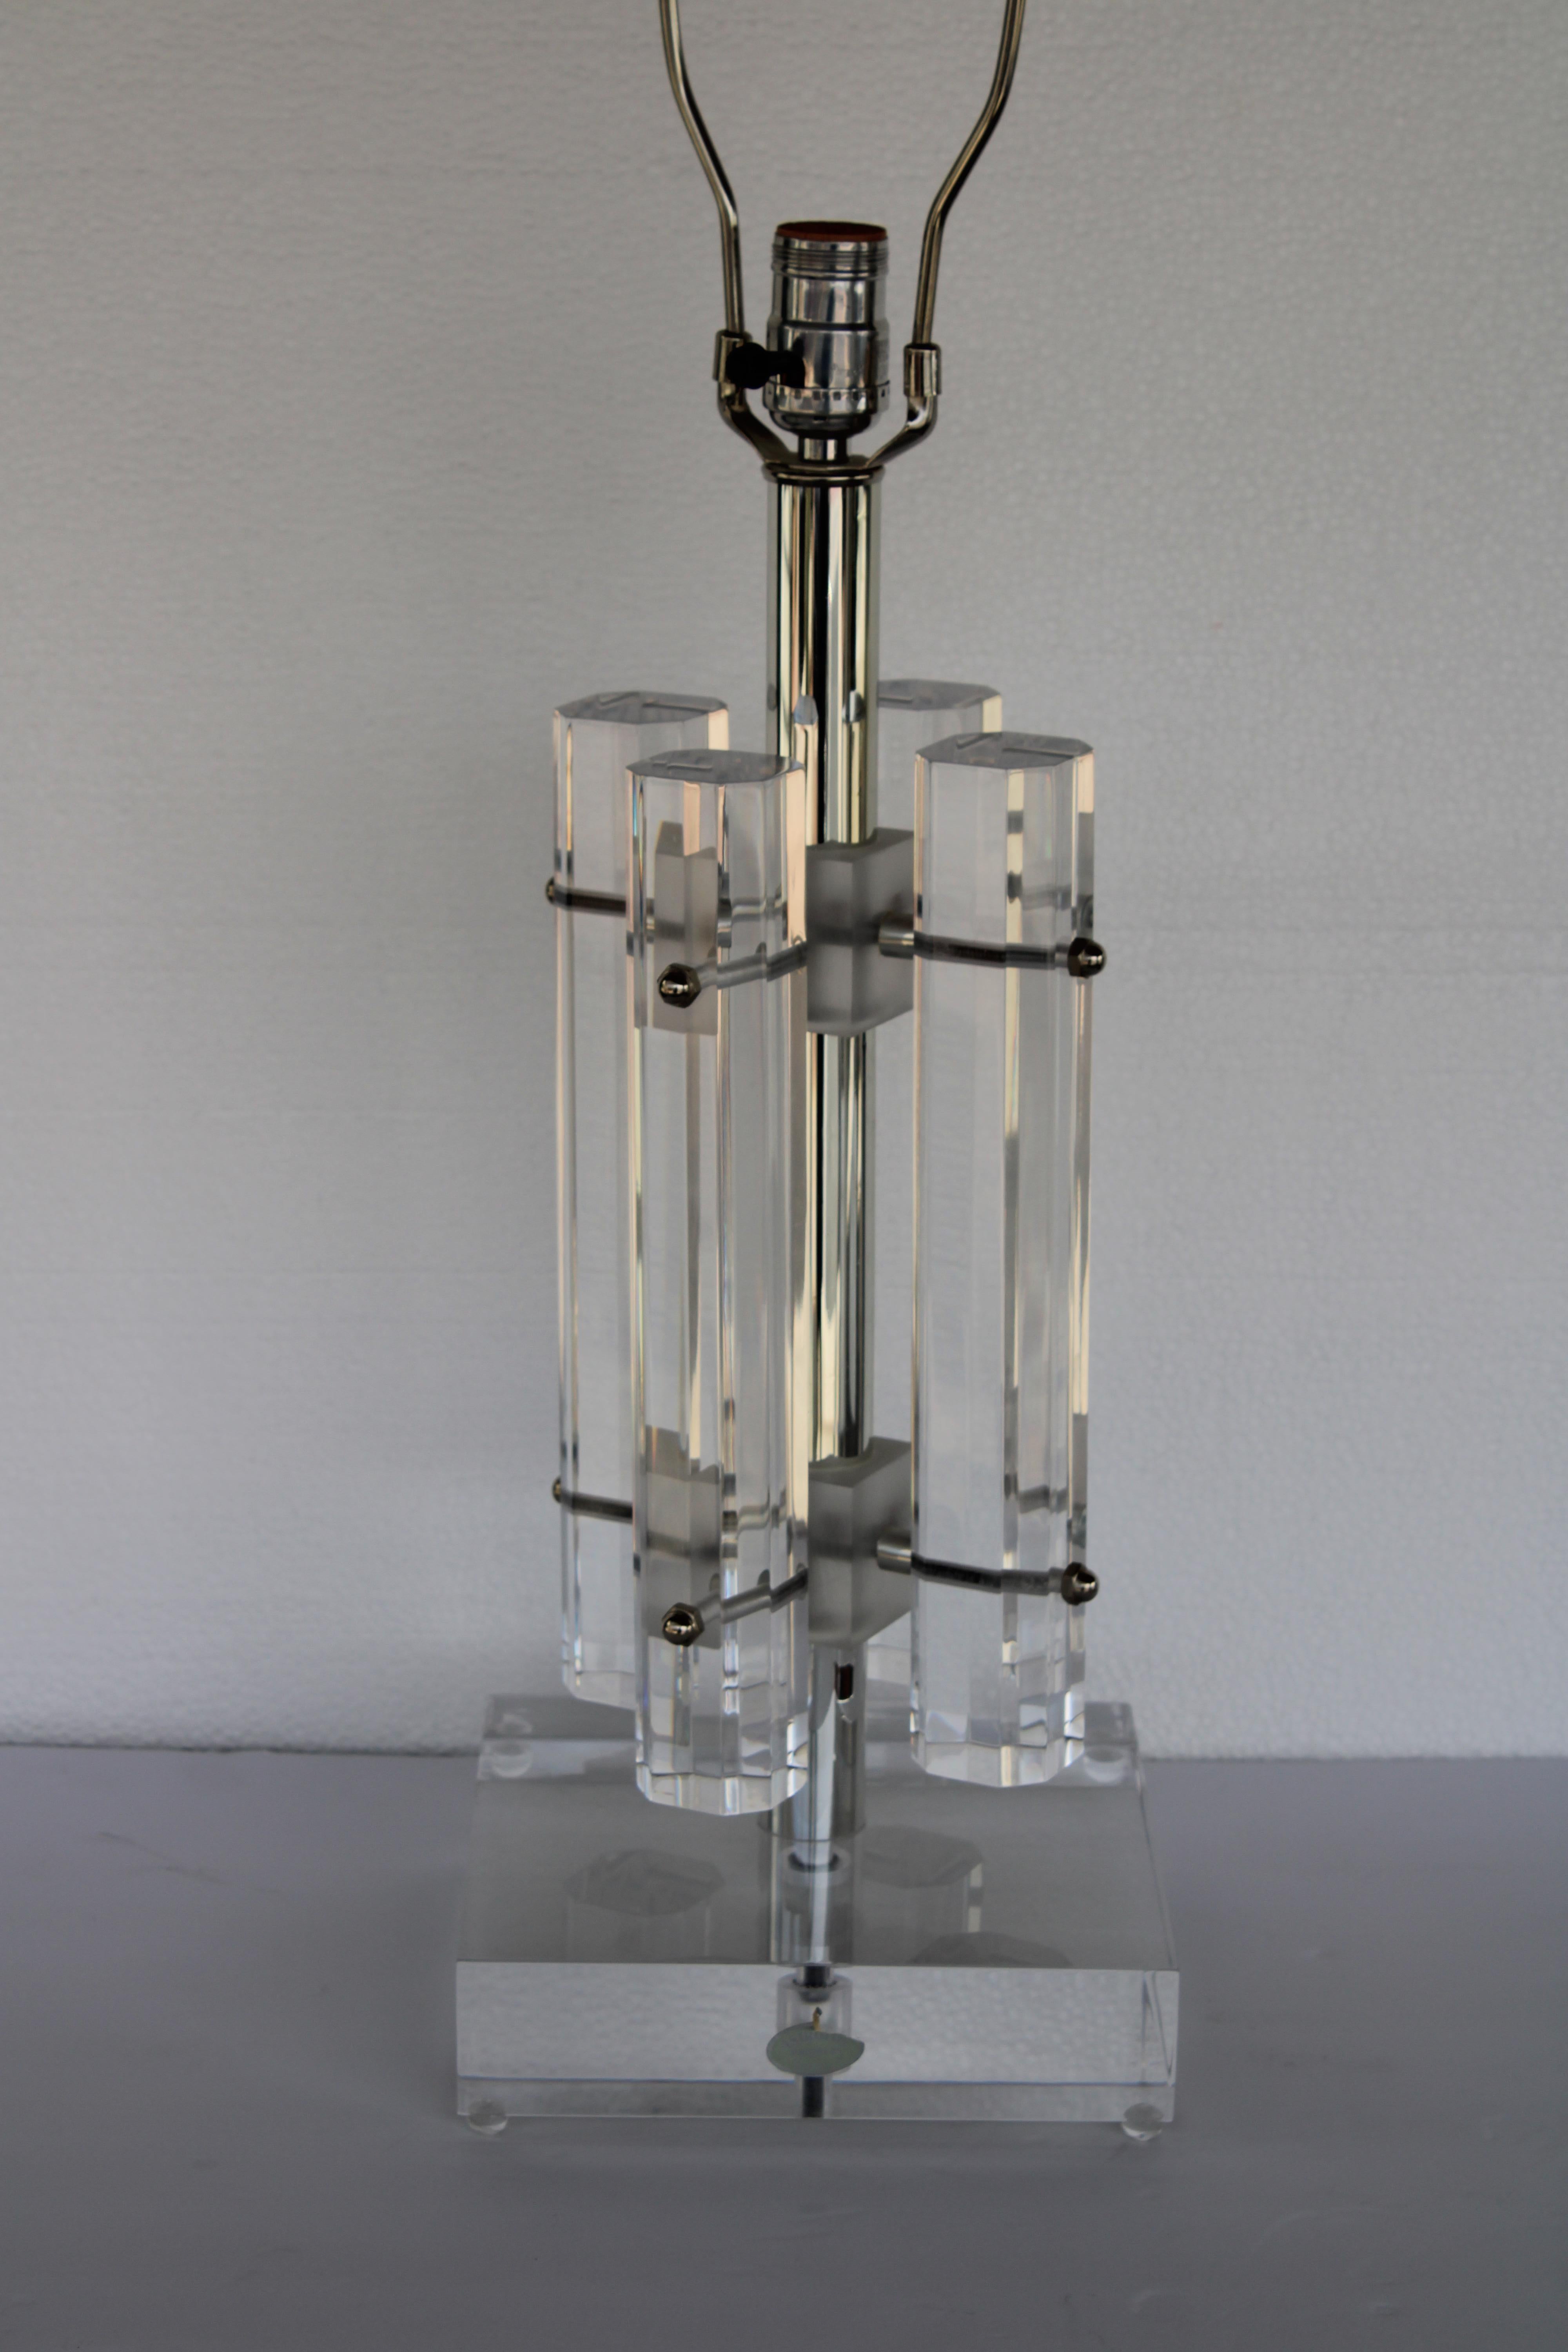 Lucite lamp by Astrolite for the Ritts Company, Los Angeles, CA. Lamp base measures 8